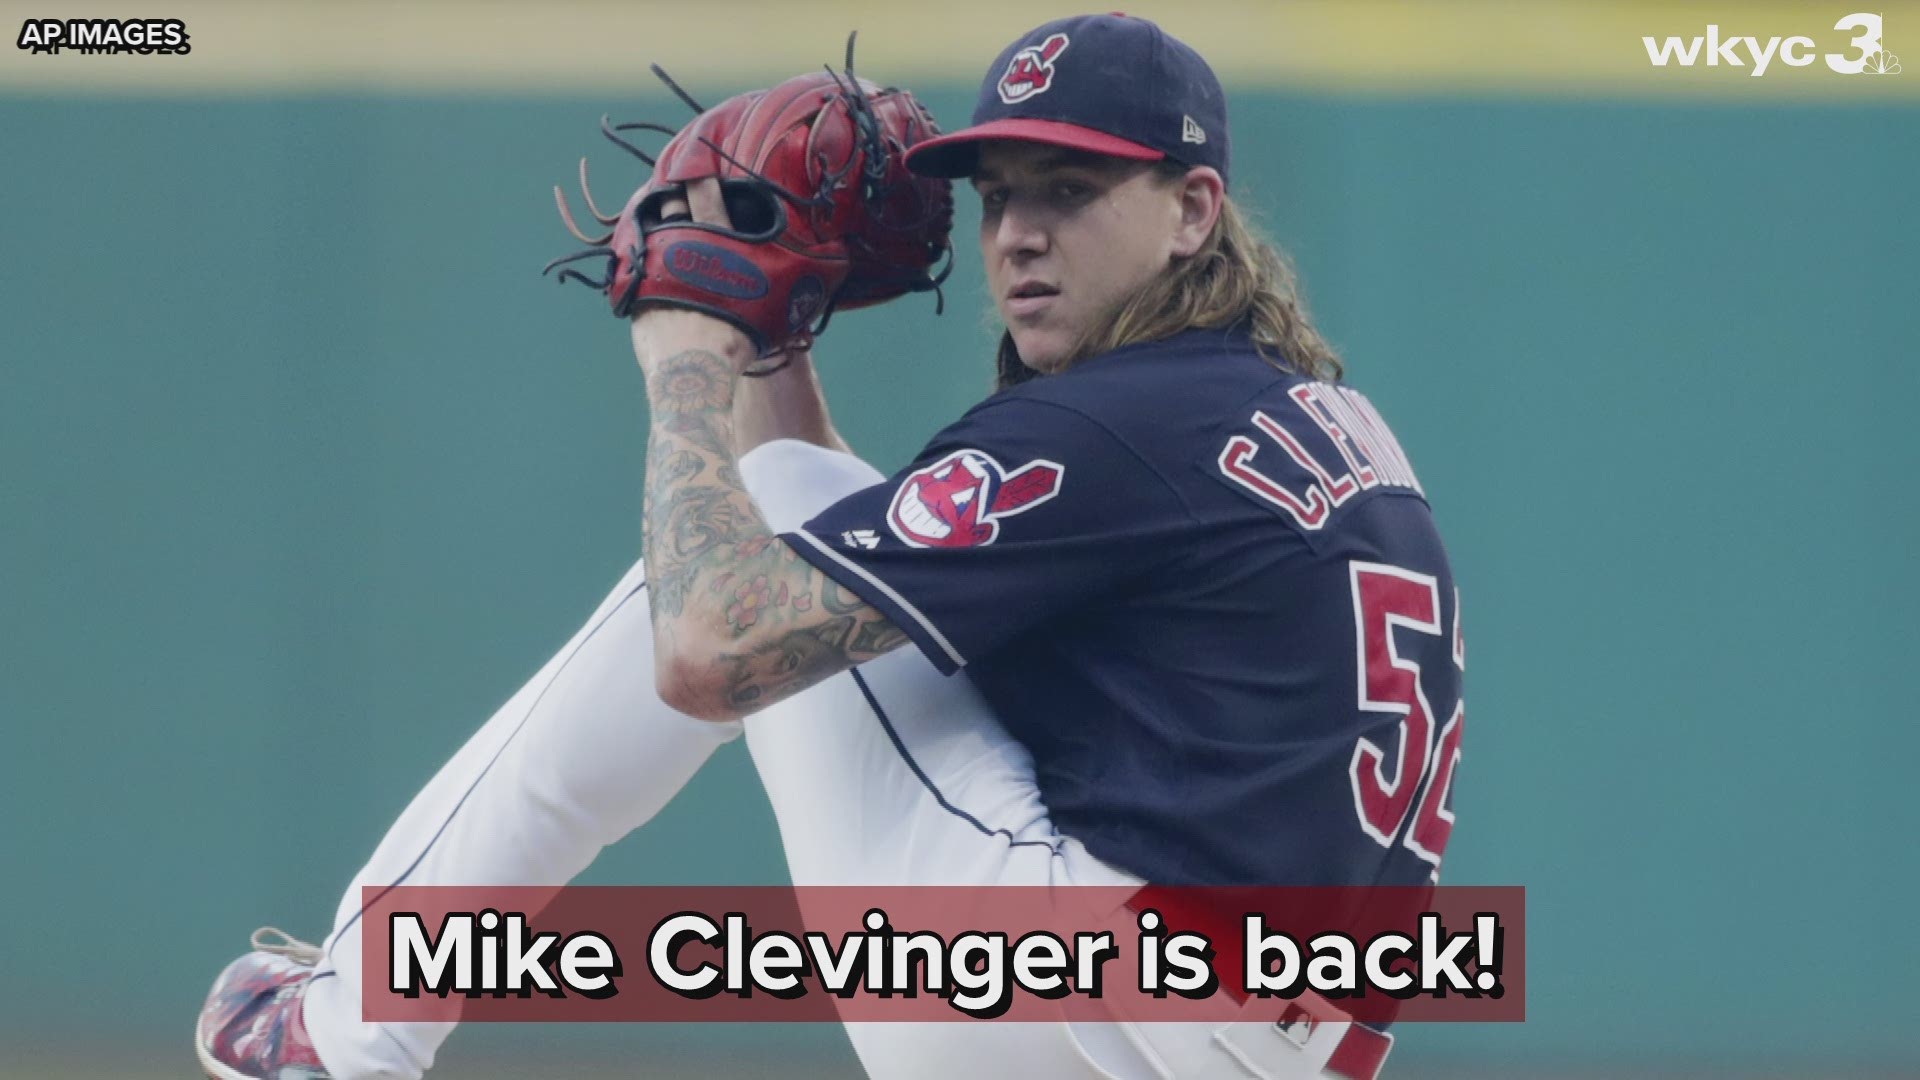 Cleveland Indians manager Terry Francona told reporters on Wednesday that Mike Clevinger will make his return to the team's rotation Monday vs. the Texas Rangers.